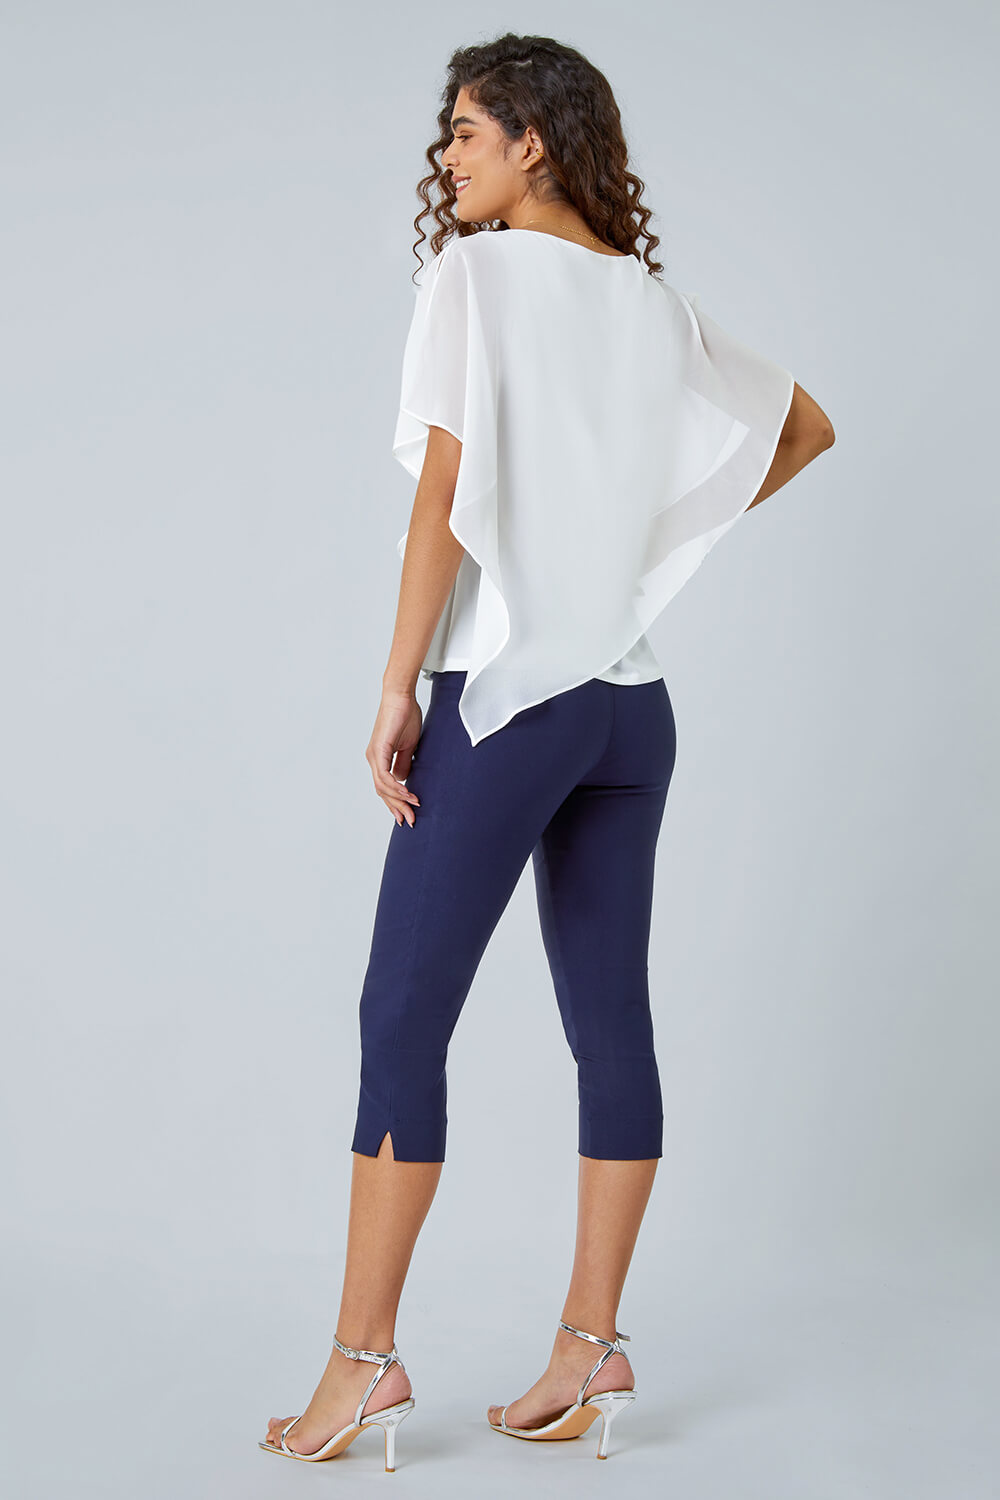 Ivory  Asymmetric Cold Shoulder Stretch Top, Image 3 of 5